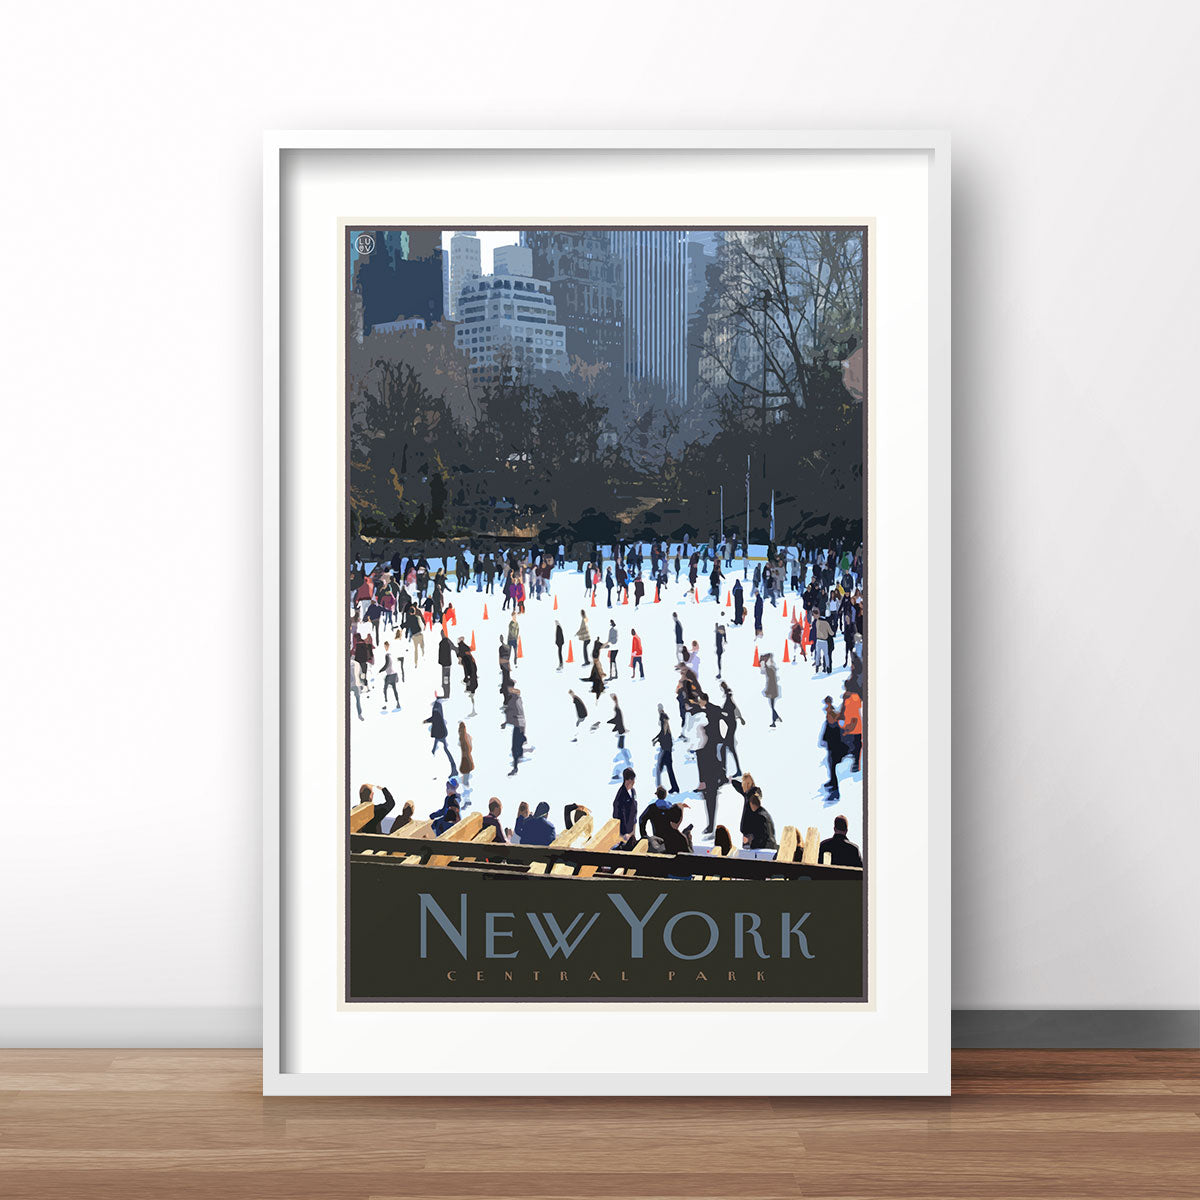 New York print vintage travel style designed by Places We Luv